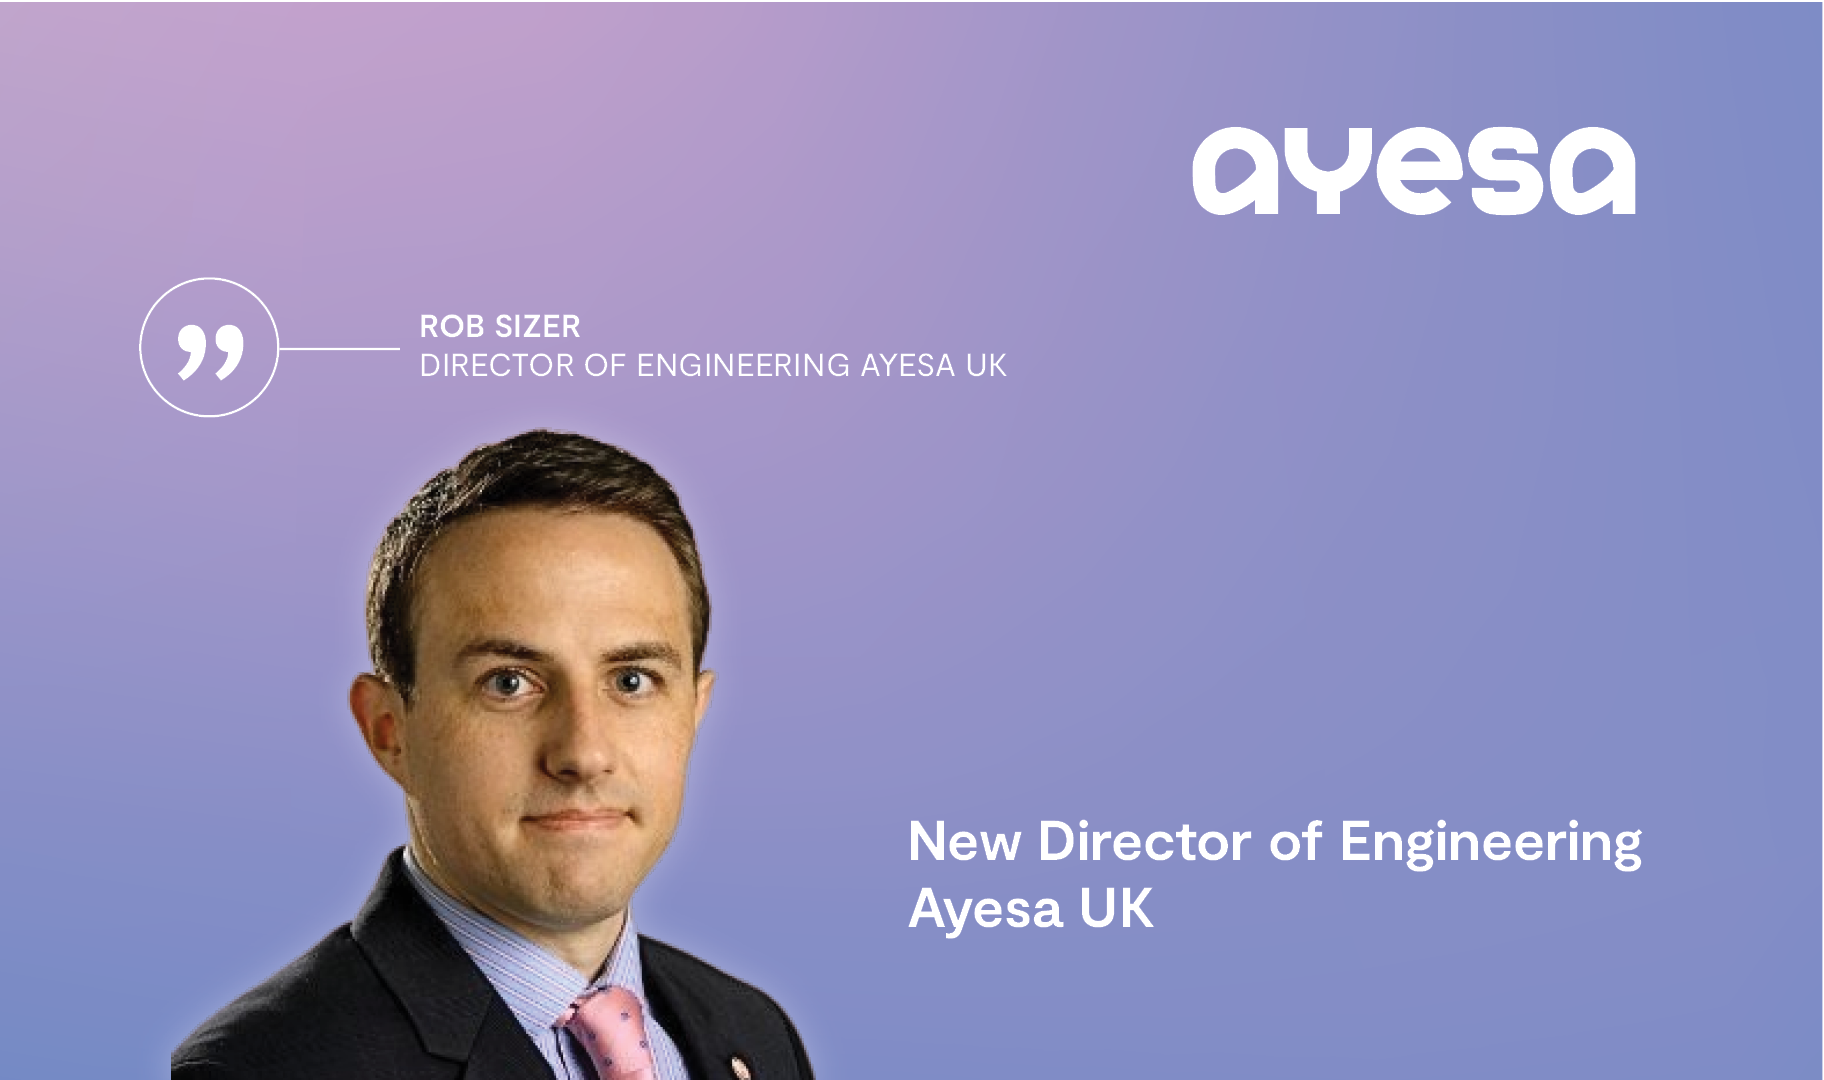 Rob Sizer appointed Director of Engineering - Ayesa UK